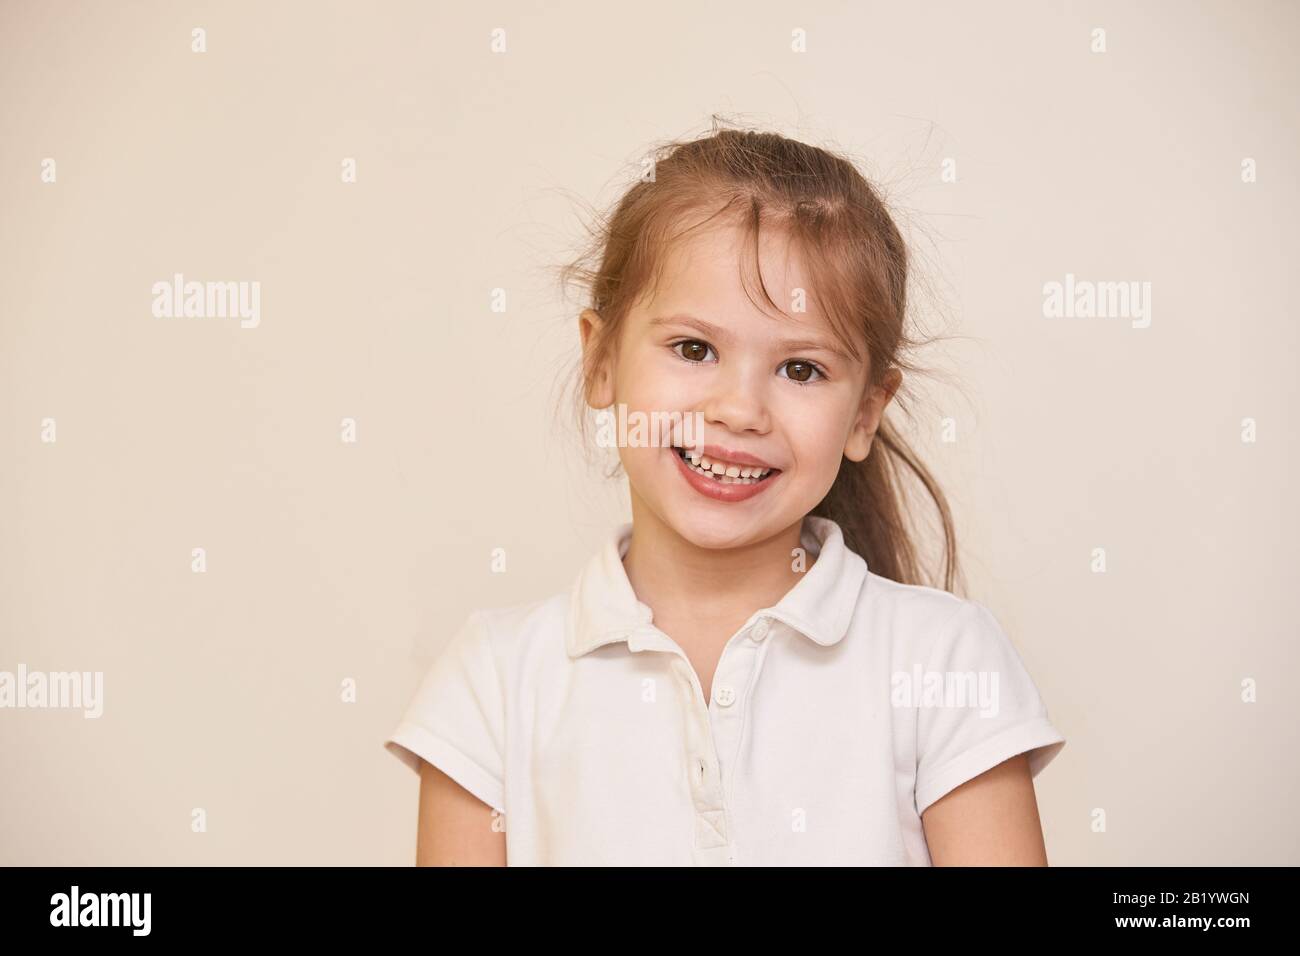 Young beauty girl portrait. Look at camera. Neutral background Stock Photo